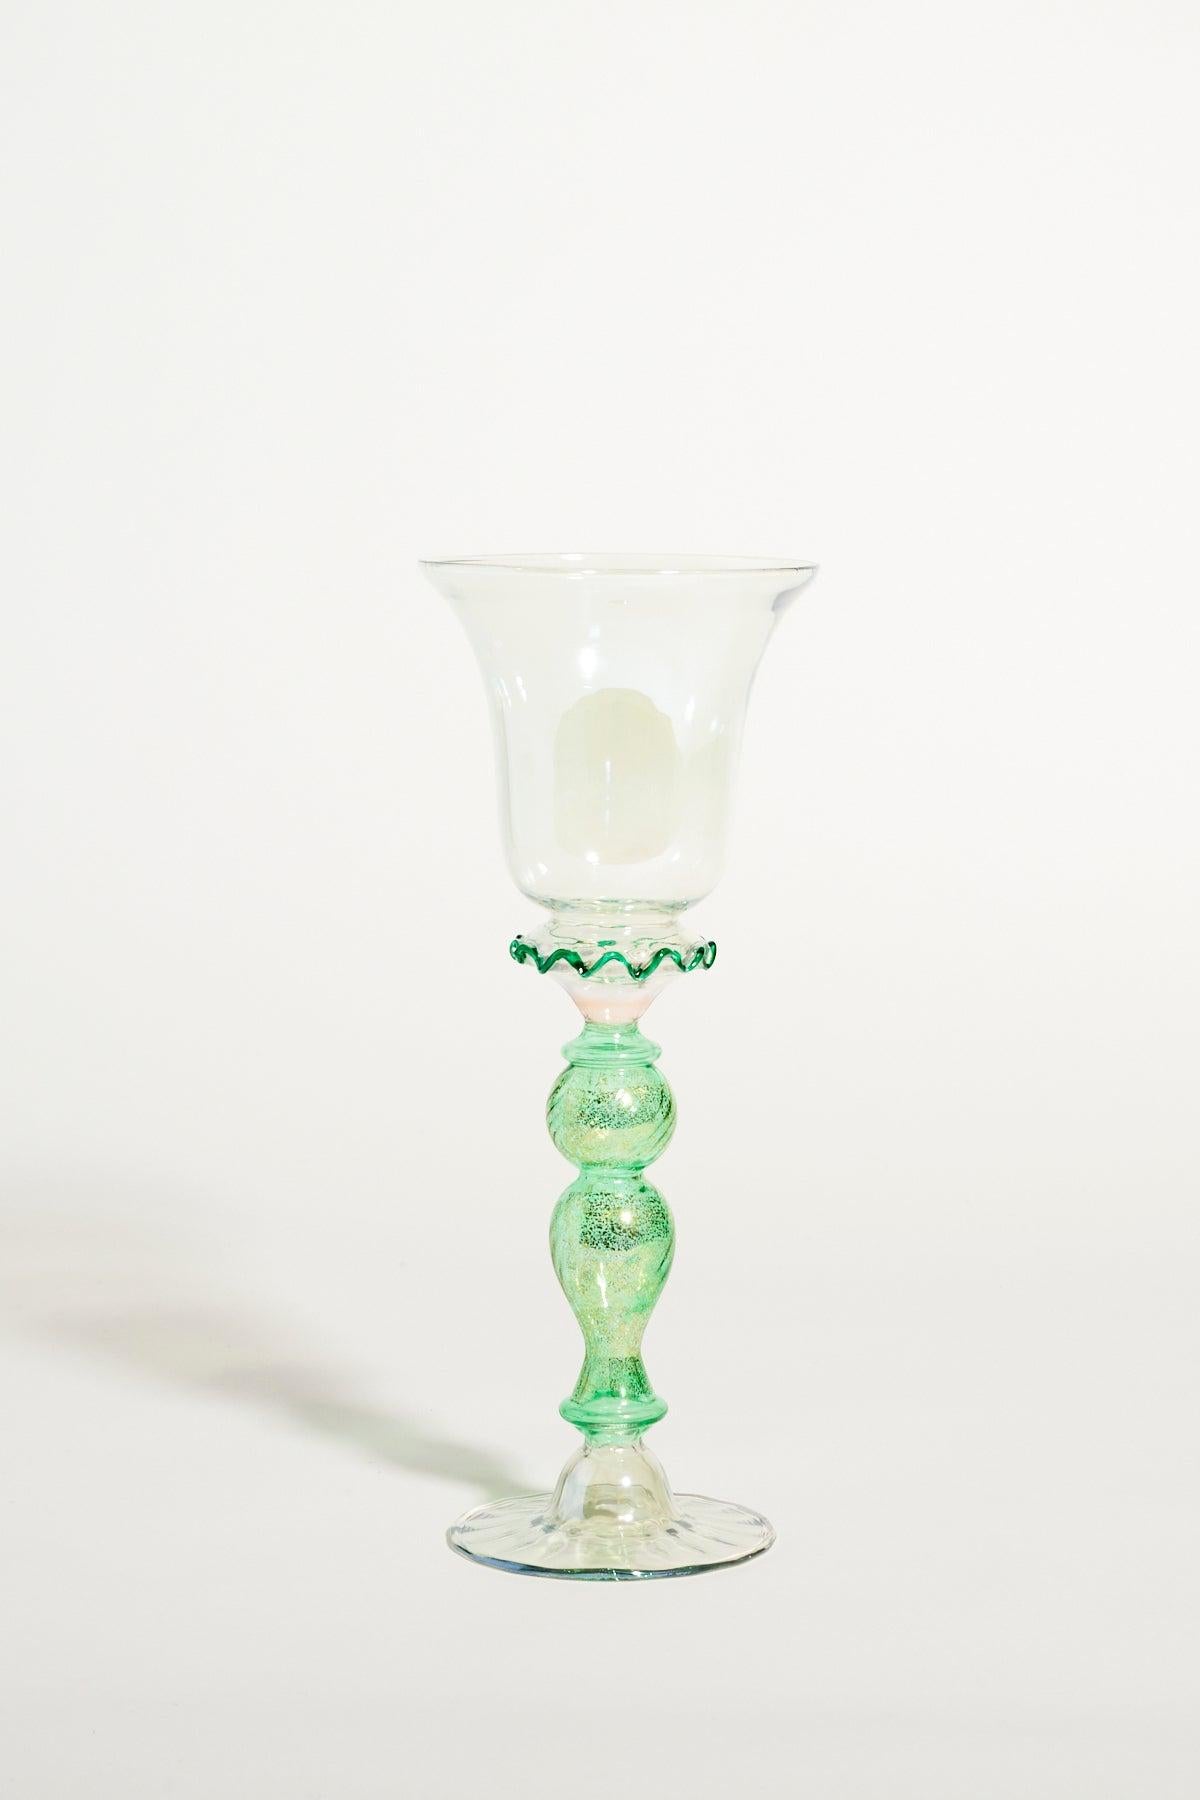 Venetian blown glass goblet with metallic green and gold stem.